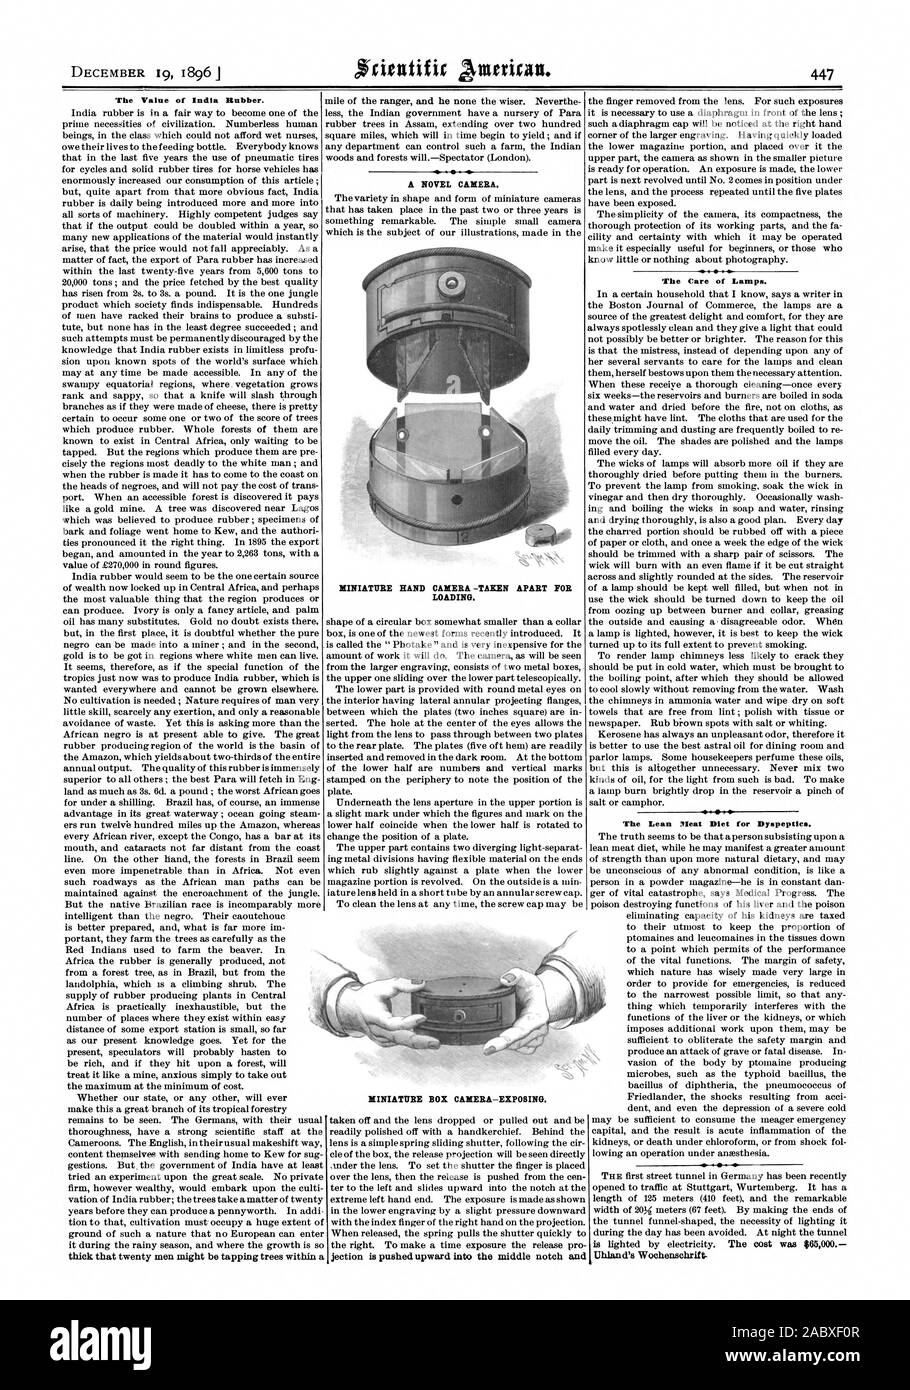 The Value of India Rubber. thick that twenty men might be tapping trees within a A NOVEL CAMERA. The Care of Lamps. The Lean Meat Diet for Dyspeptics. MINIATURE HAND CAMERA -TAKEN APART FOR LOADING., scientific american, 1896-12-19 Stock Photo